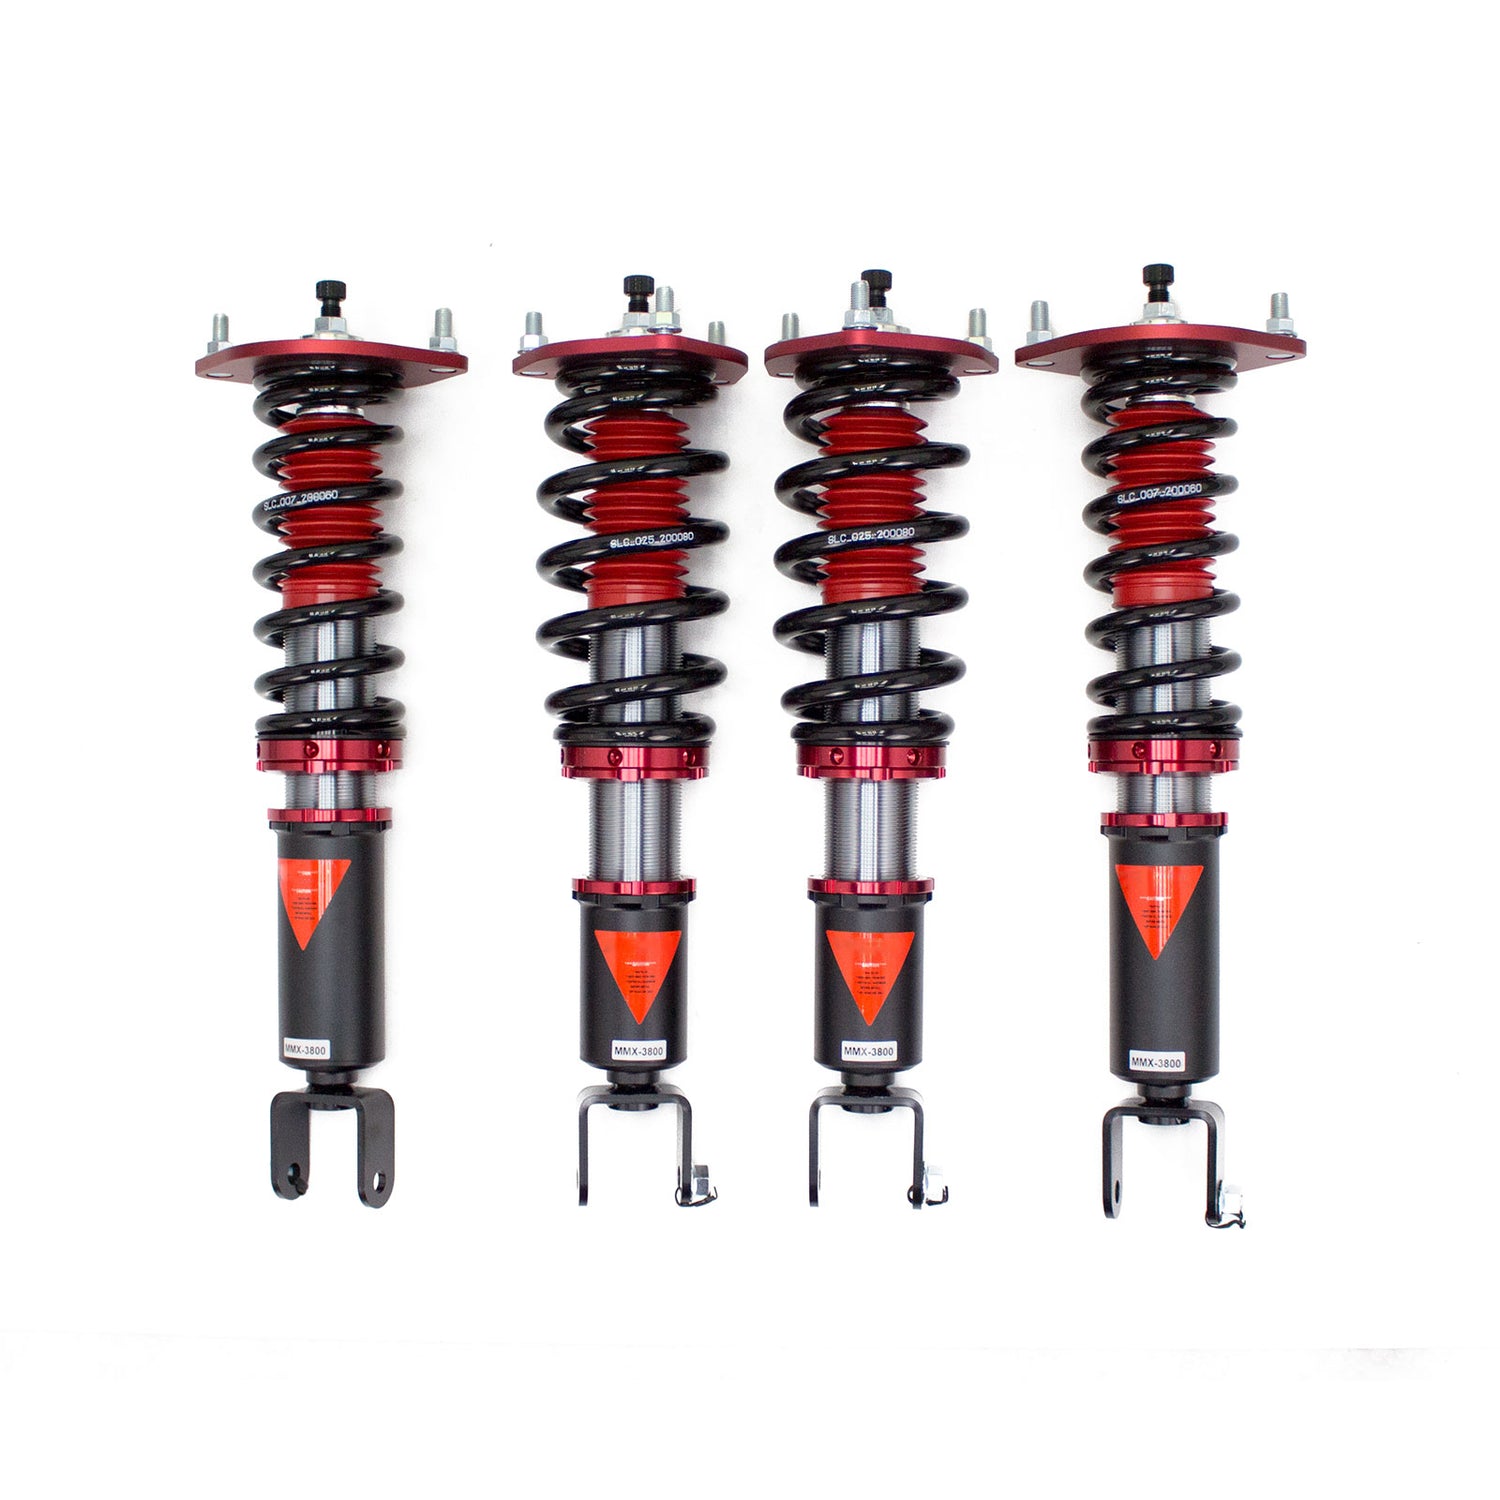 MMX3800 MAXX Coilovers Lowering Kit, Fully Adjustable, Ride Height, 40 Clicks Rebound Settings, Mazda Miata(ND) 2016+UP